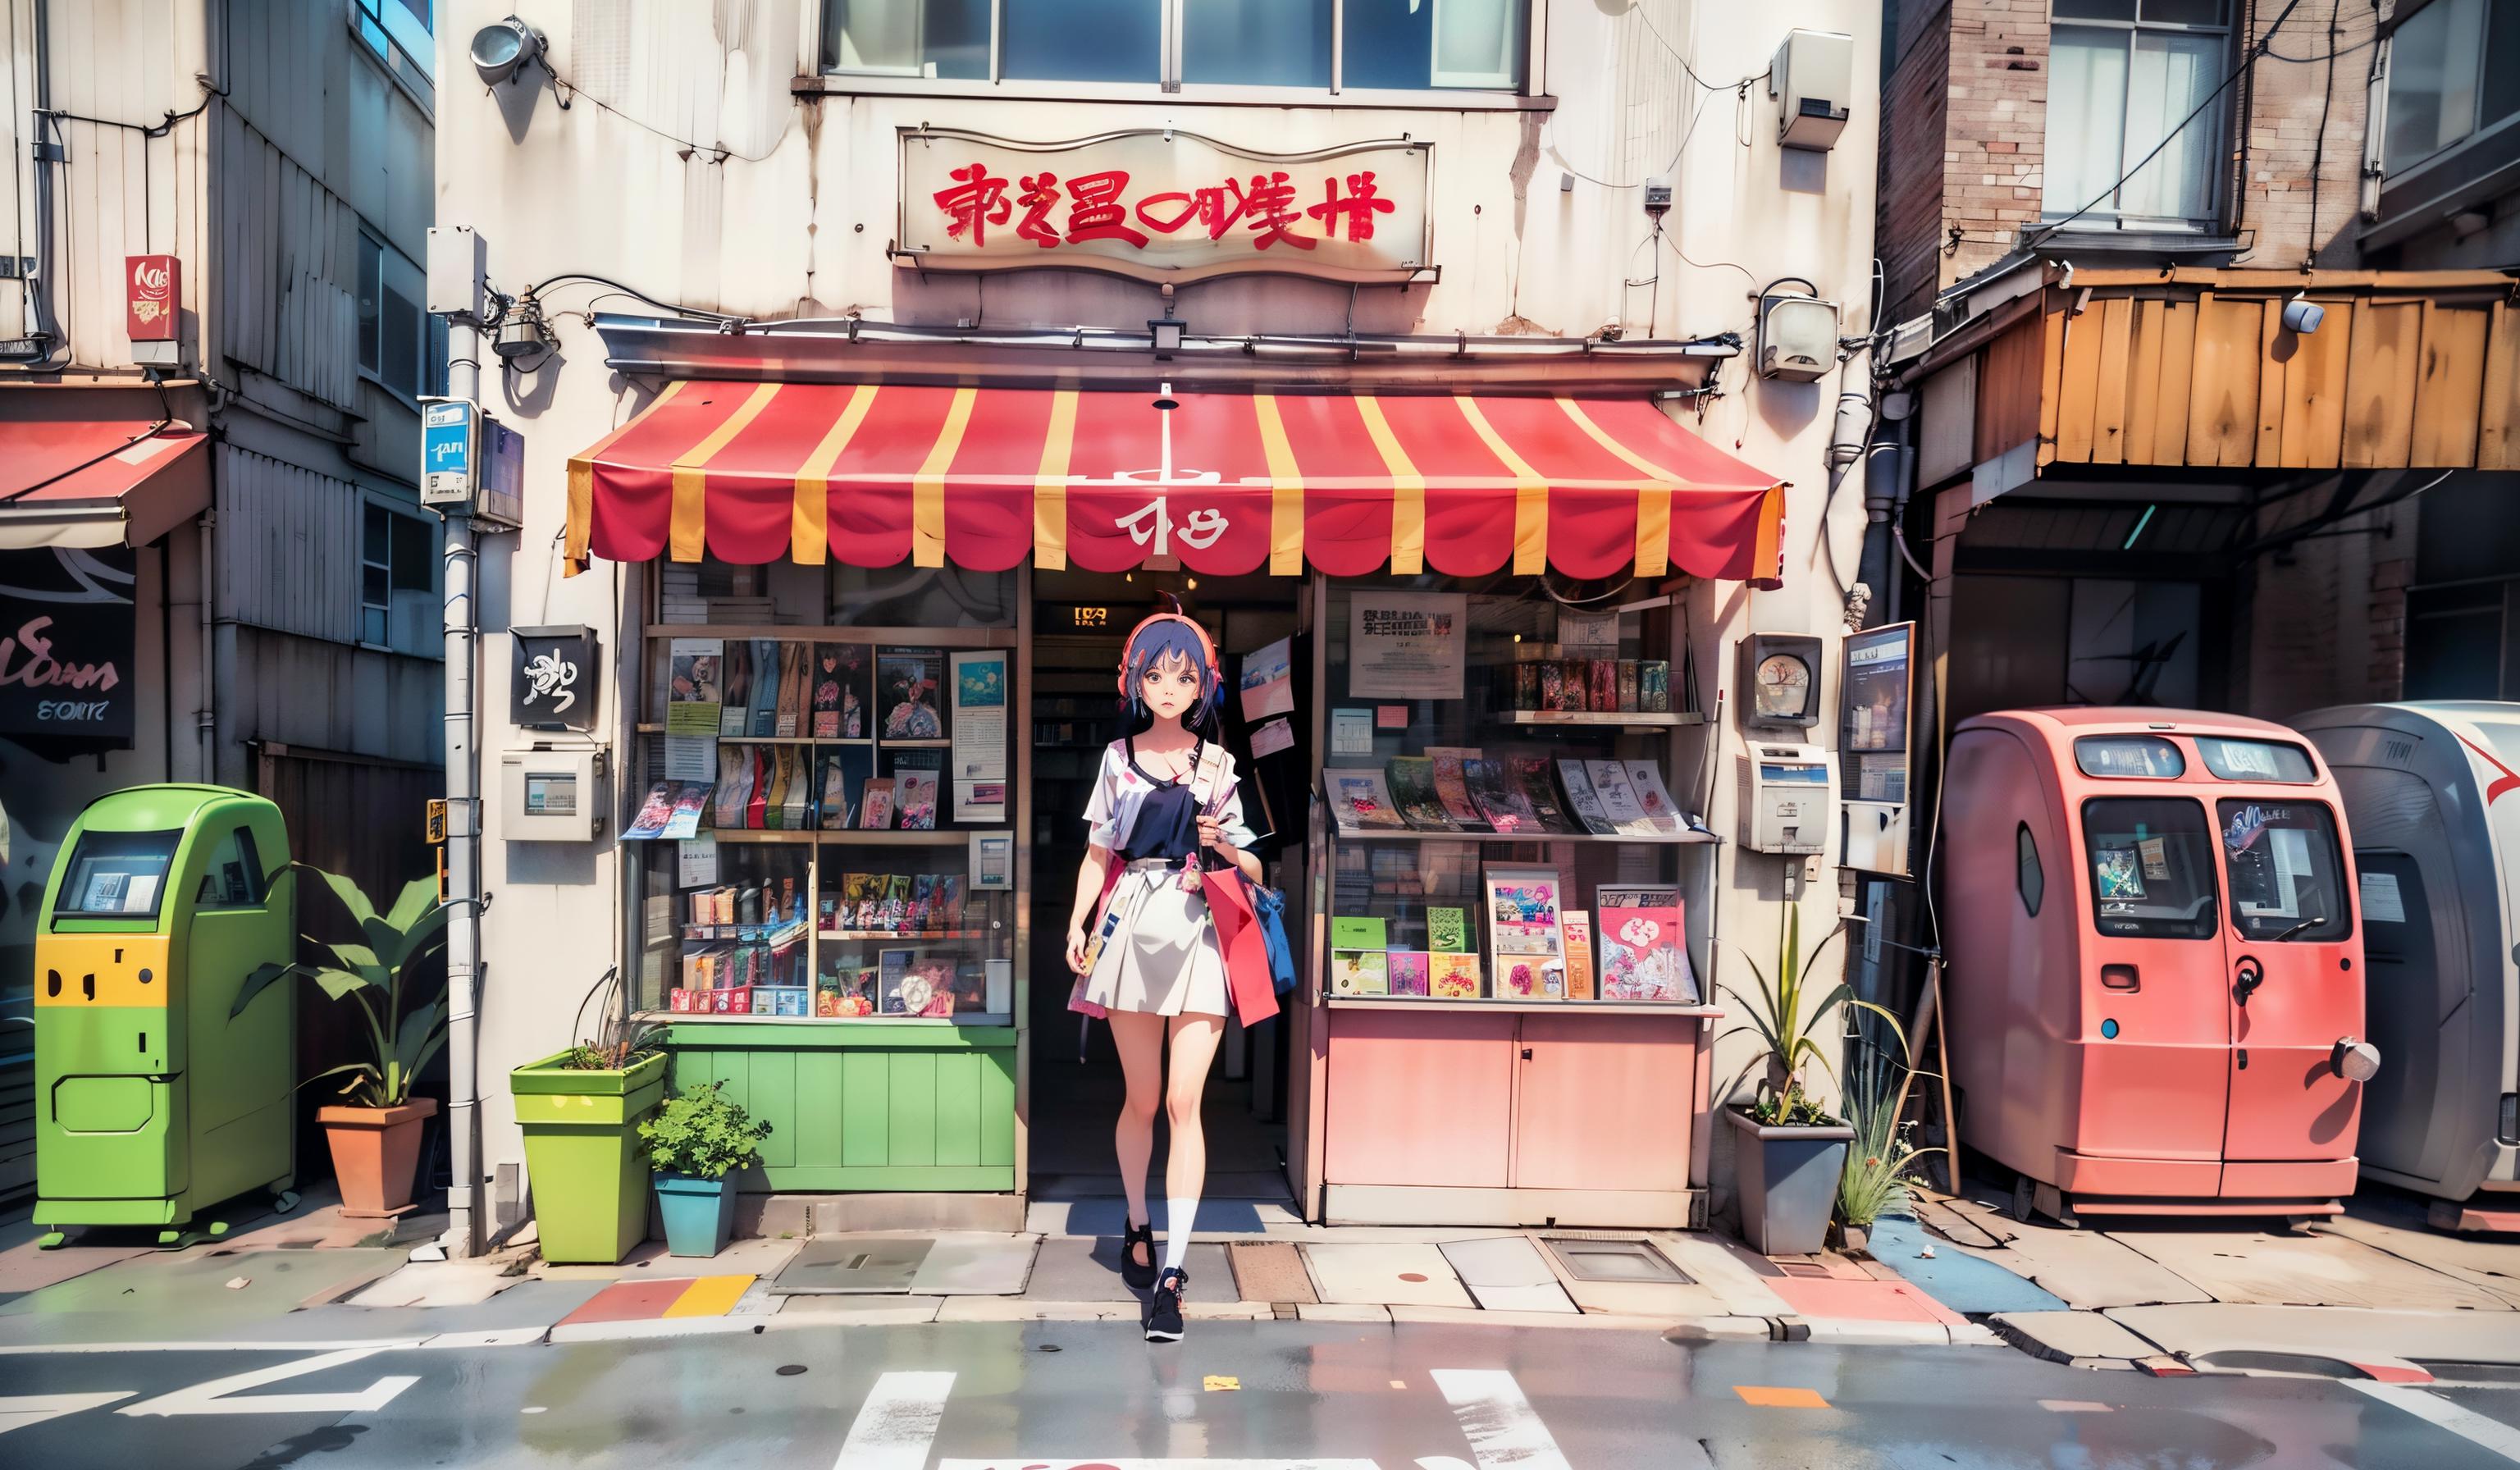 Japanese Store Front image by philjones3d980